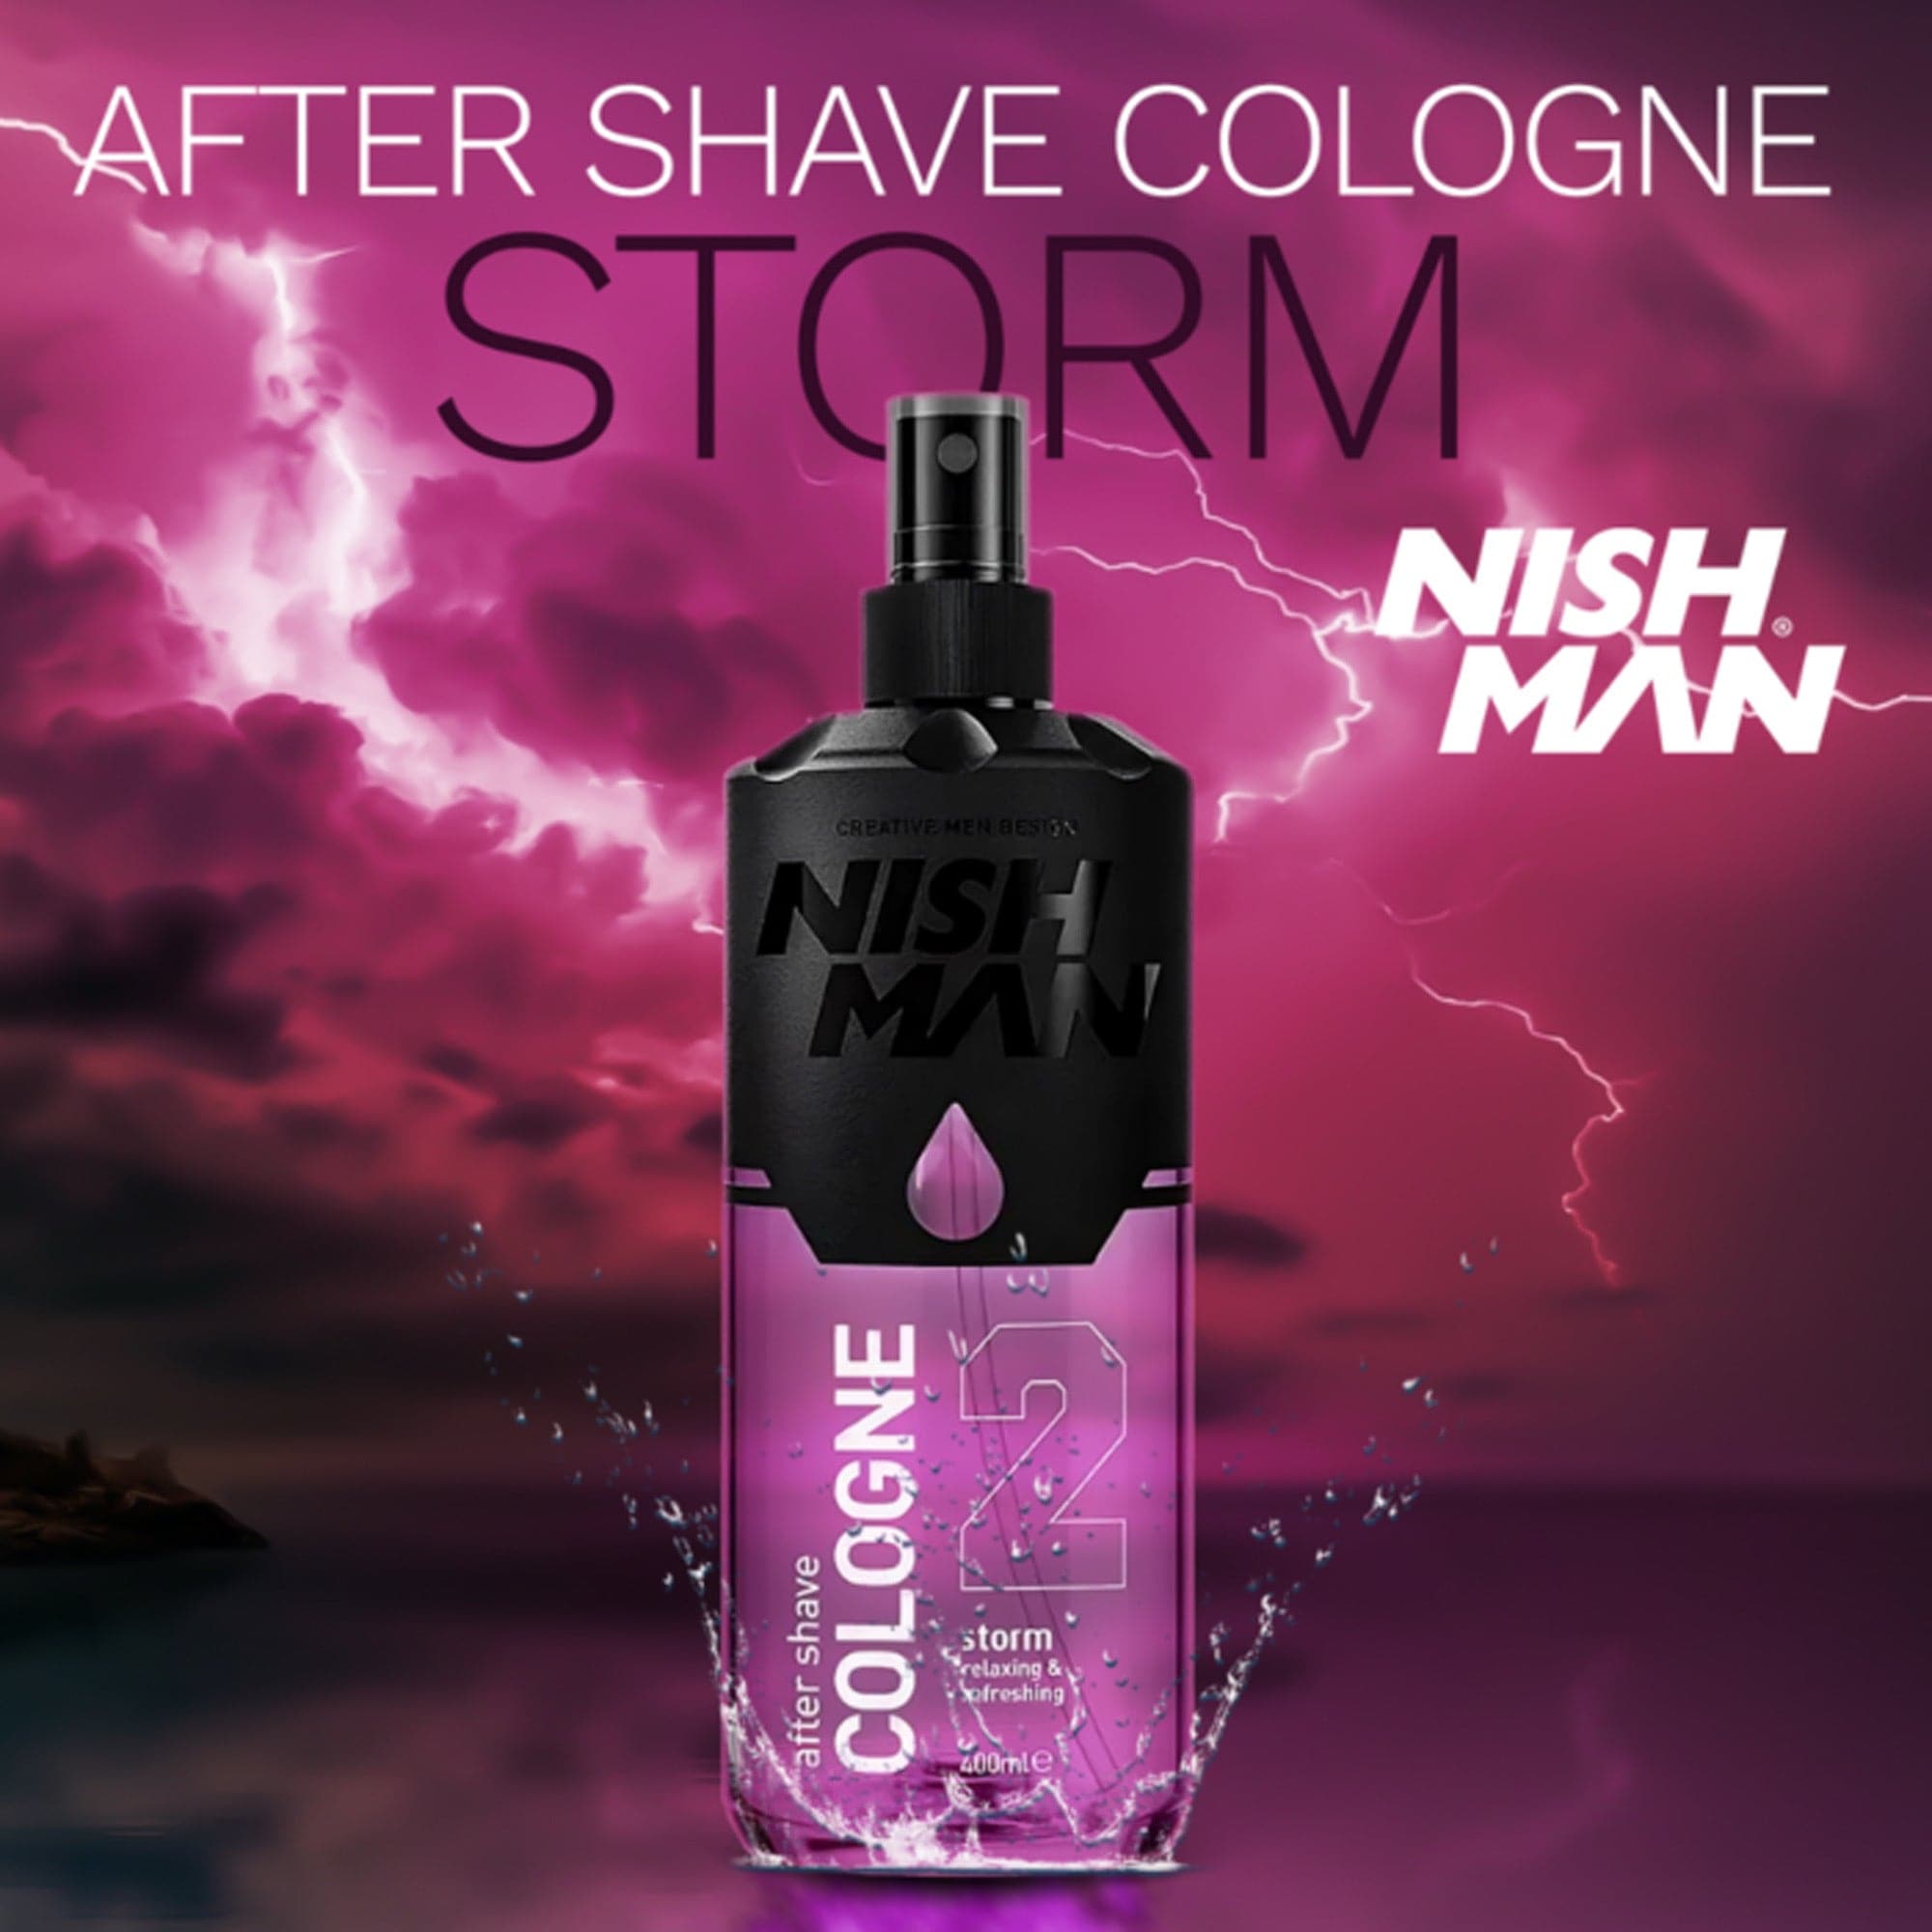 Nishman - After Shave Cologne No.2 Storm 400ml